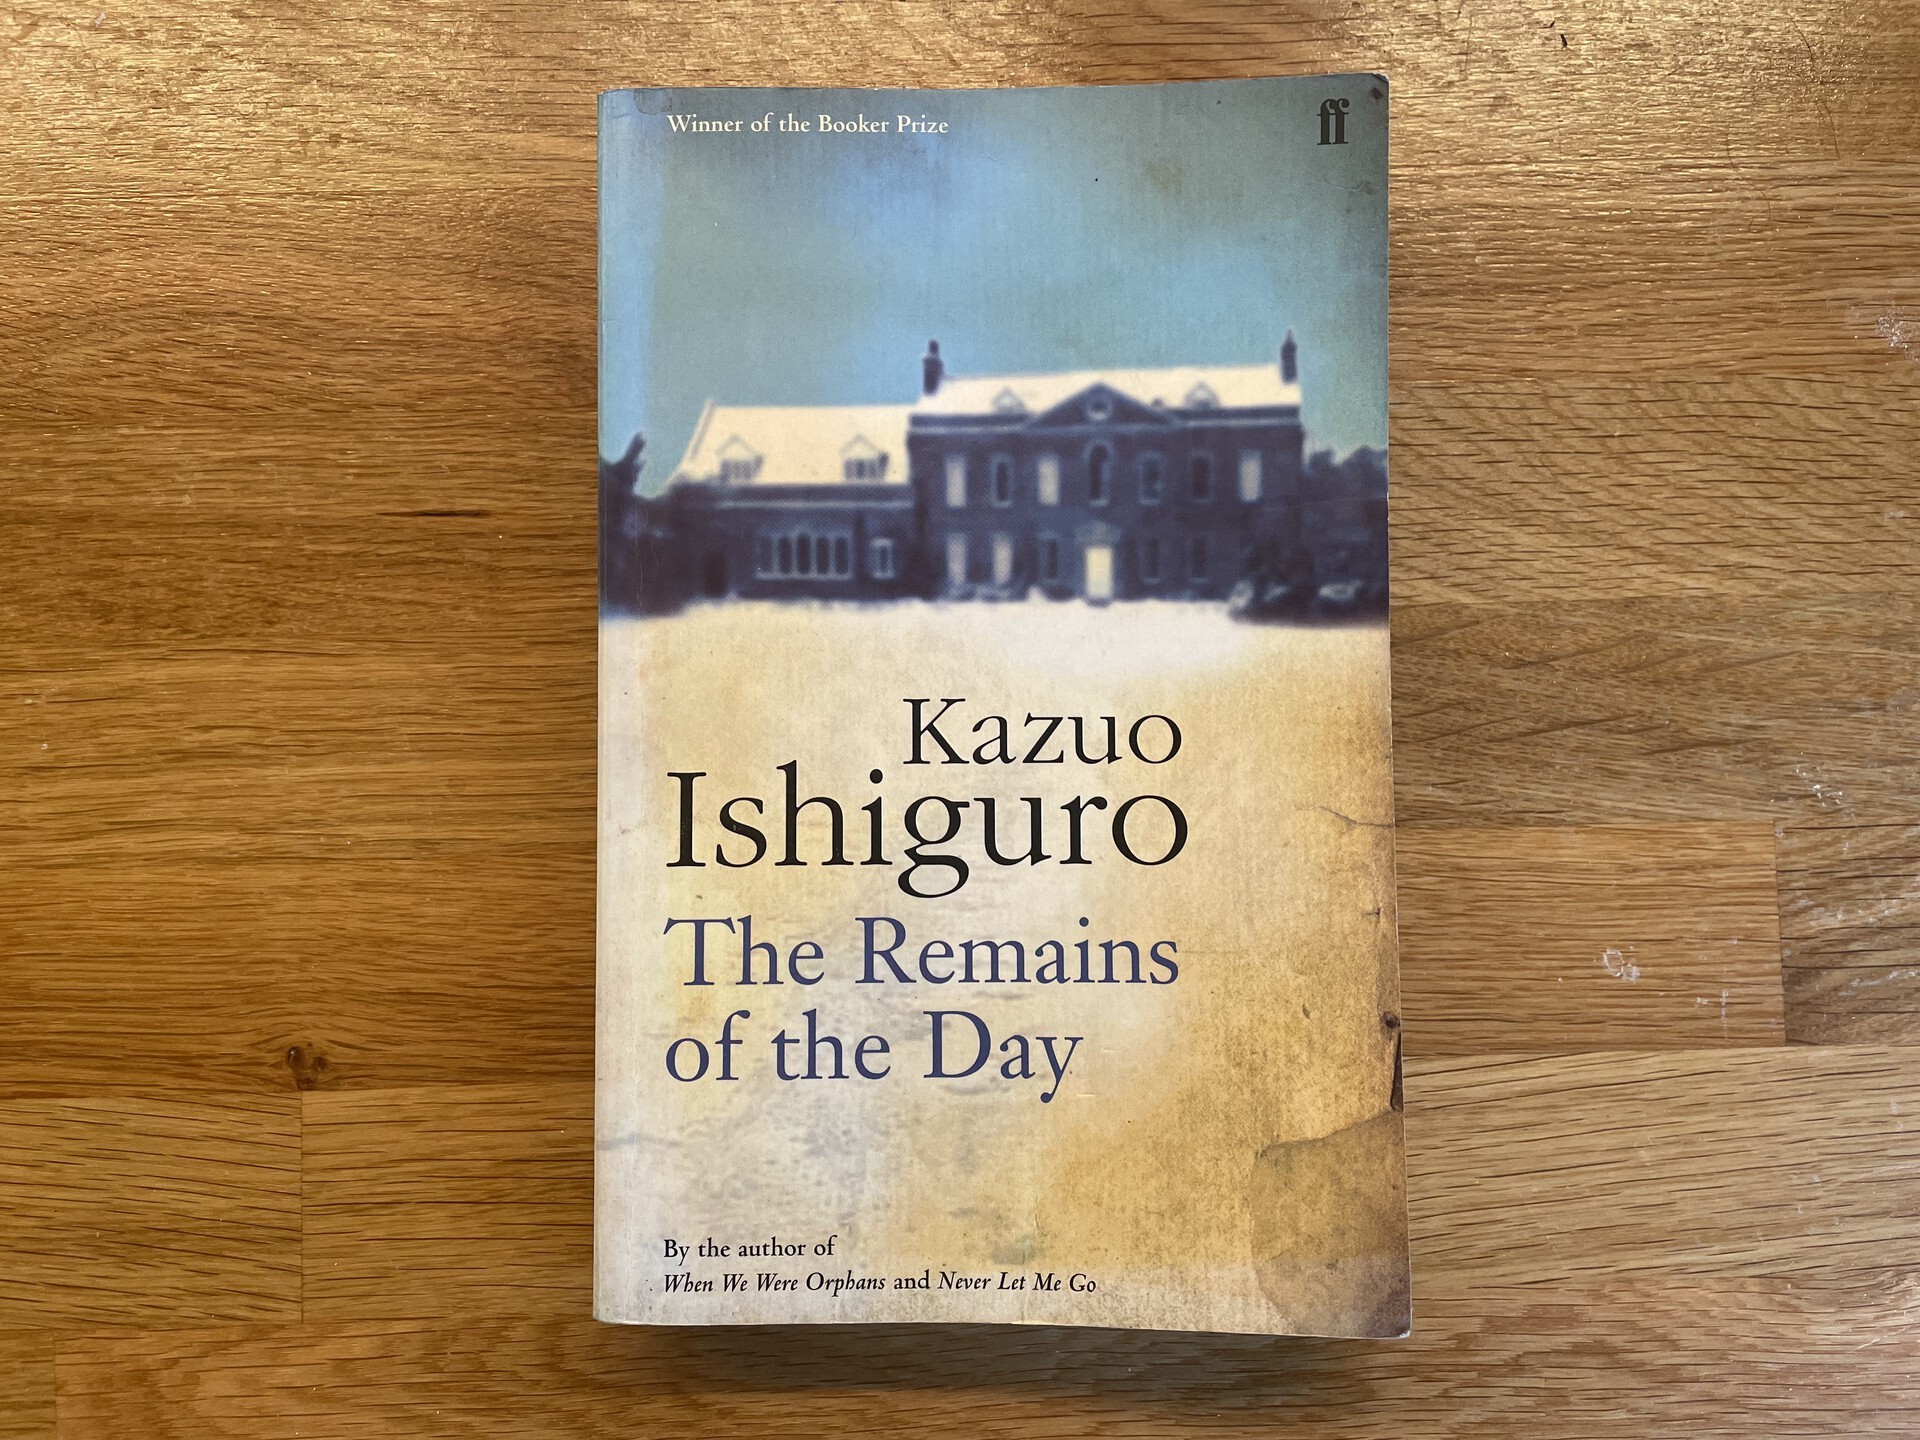 The Remains of the Day, by Kazuo Ishiguro